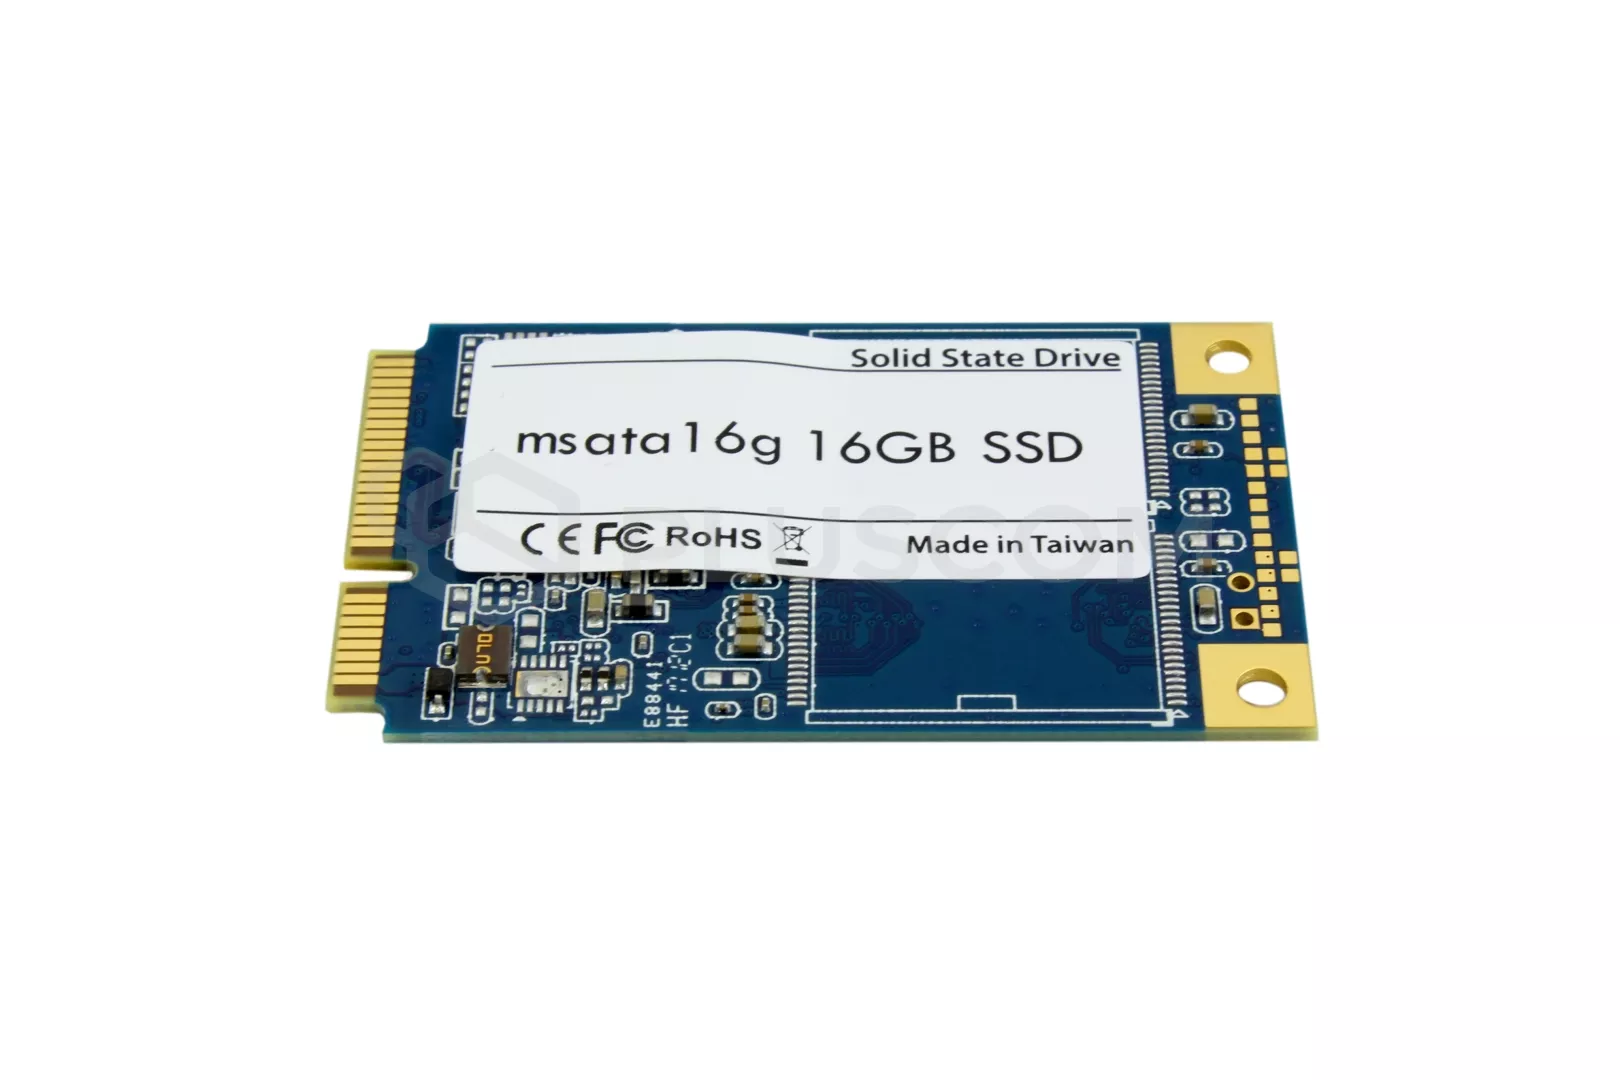 What Is A 16GB Solid State Drive?